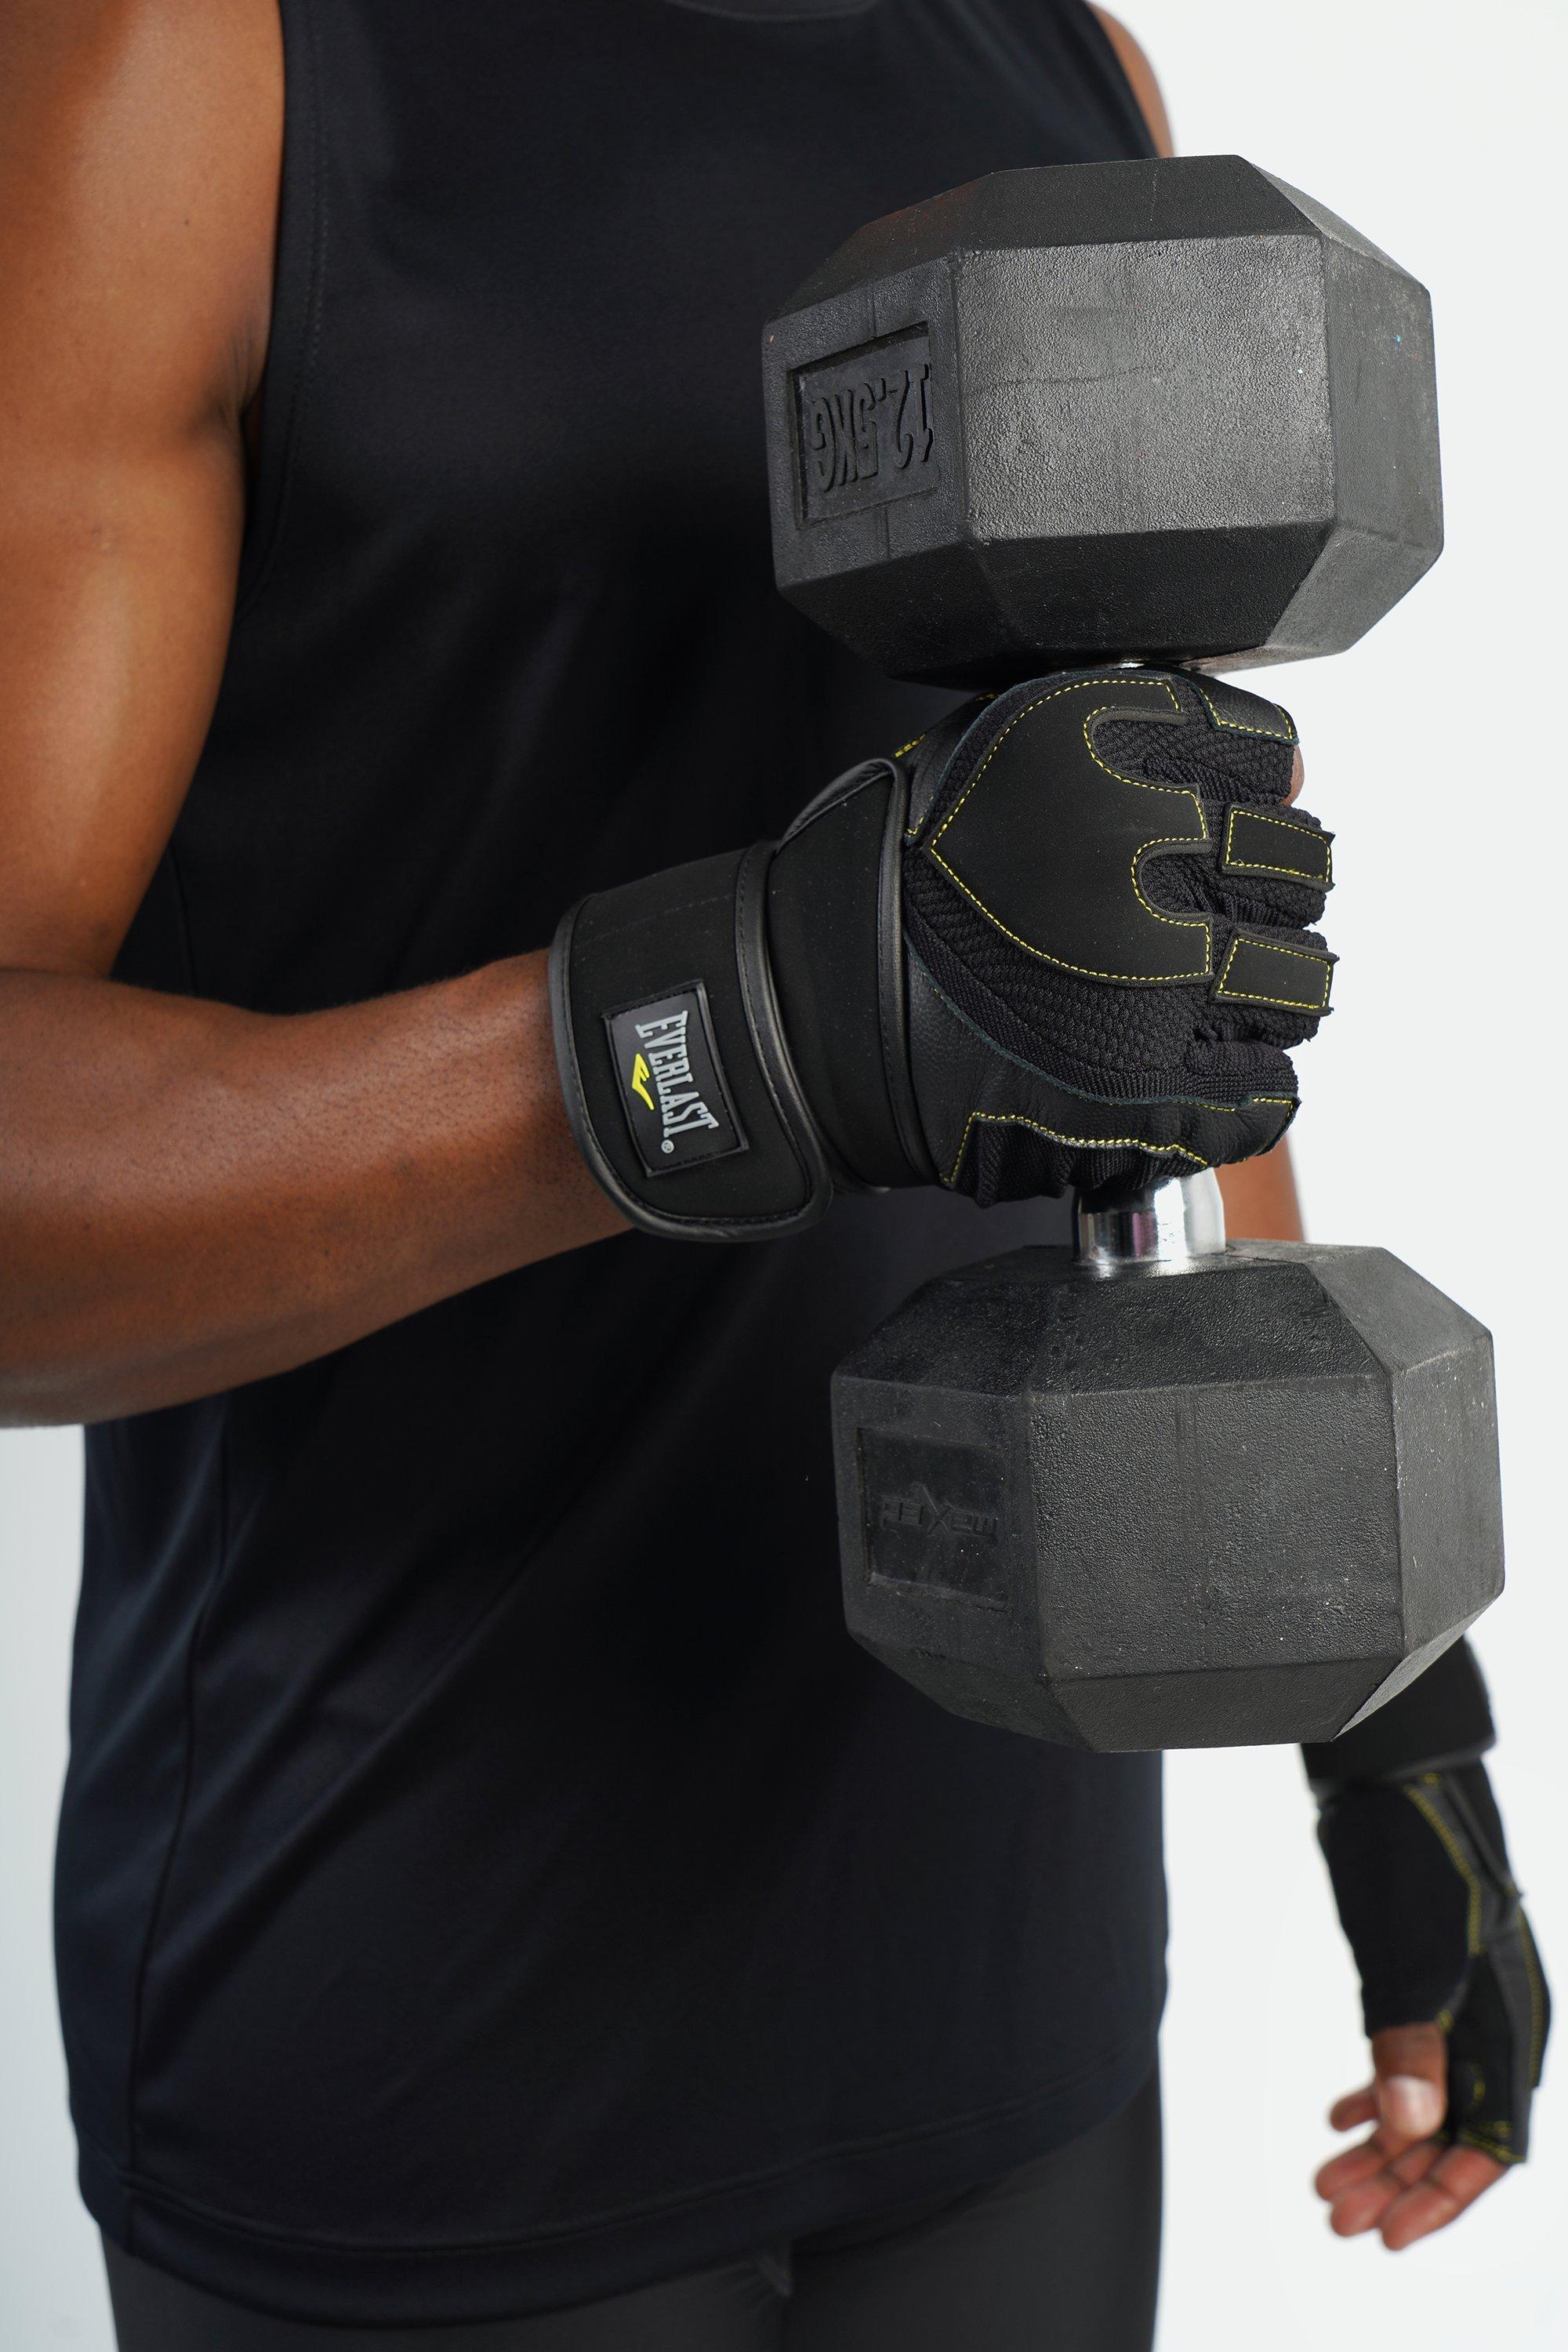 Buy Weight Lifting Gloves